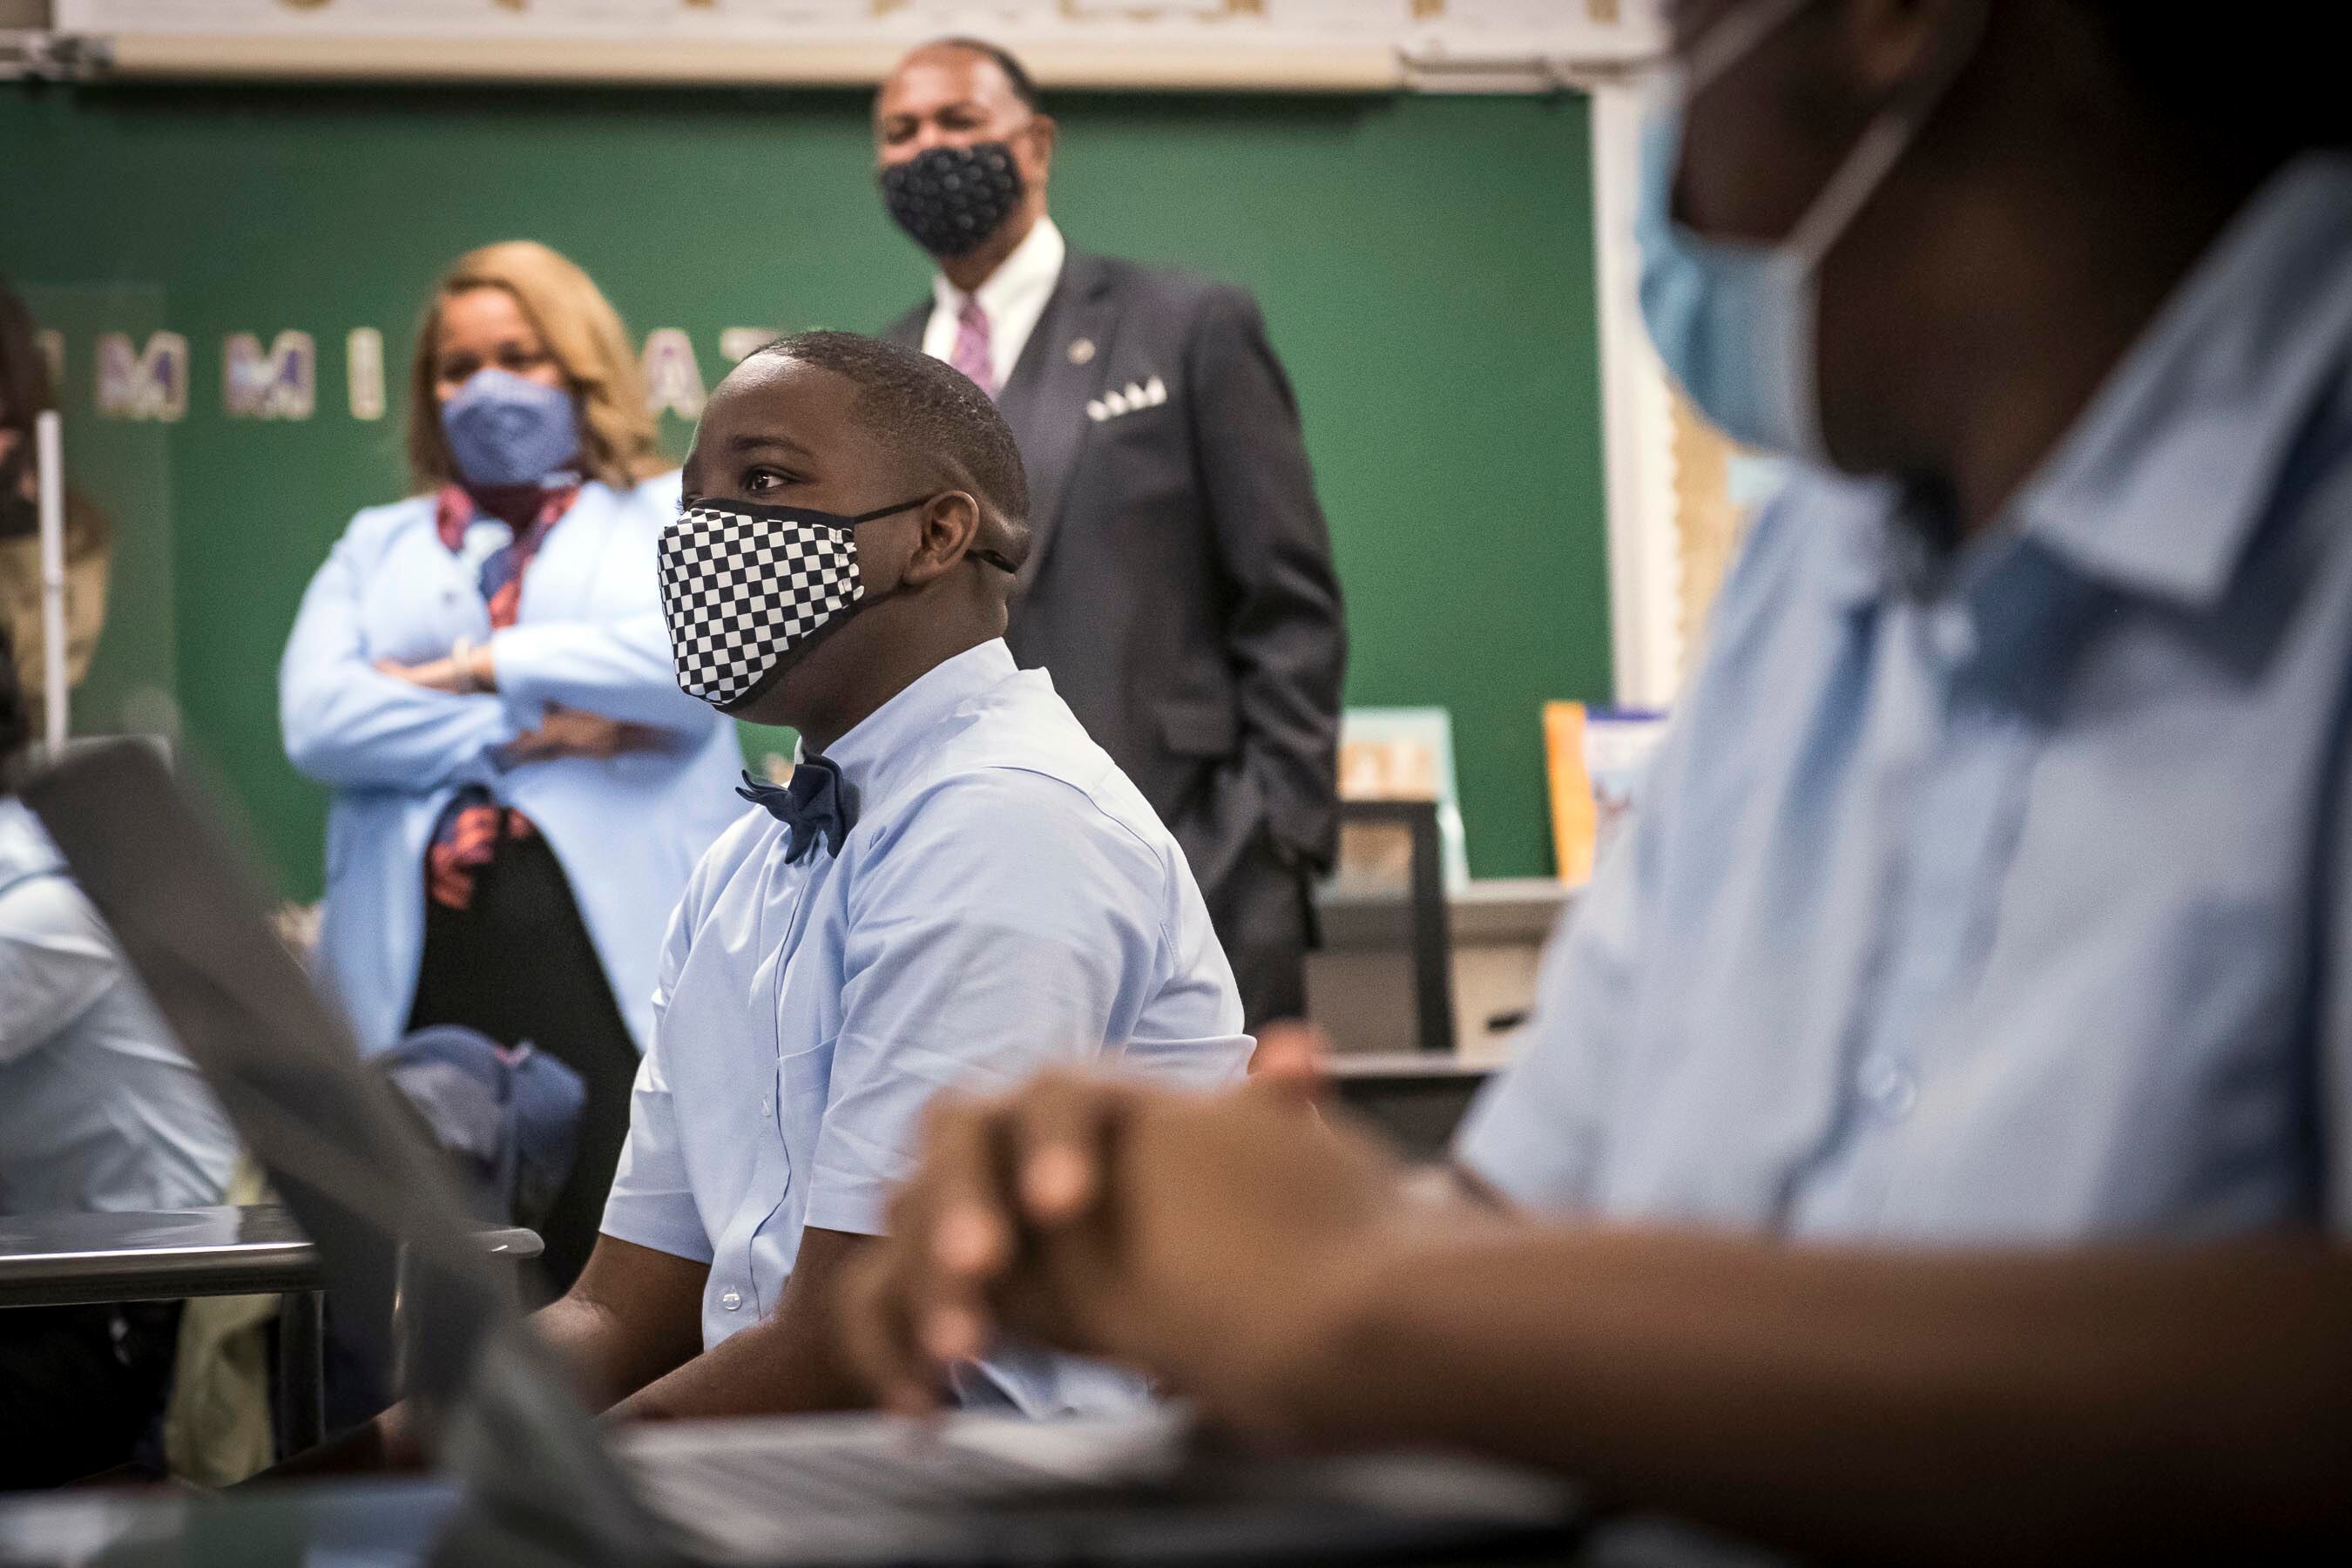 Students in blue shirts and protective masks look toward the front of the classroom as Commissioner Porter observes in the background.